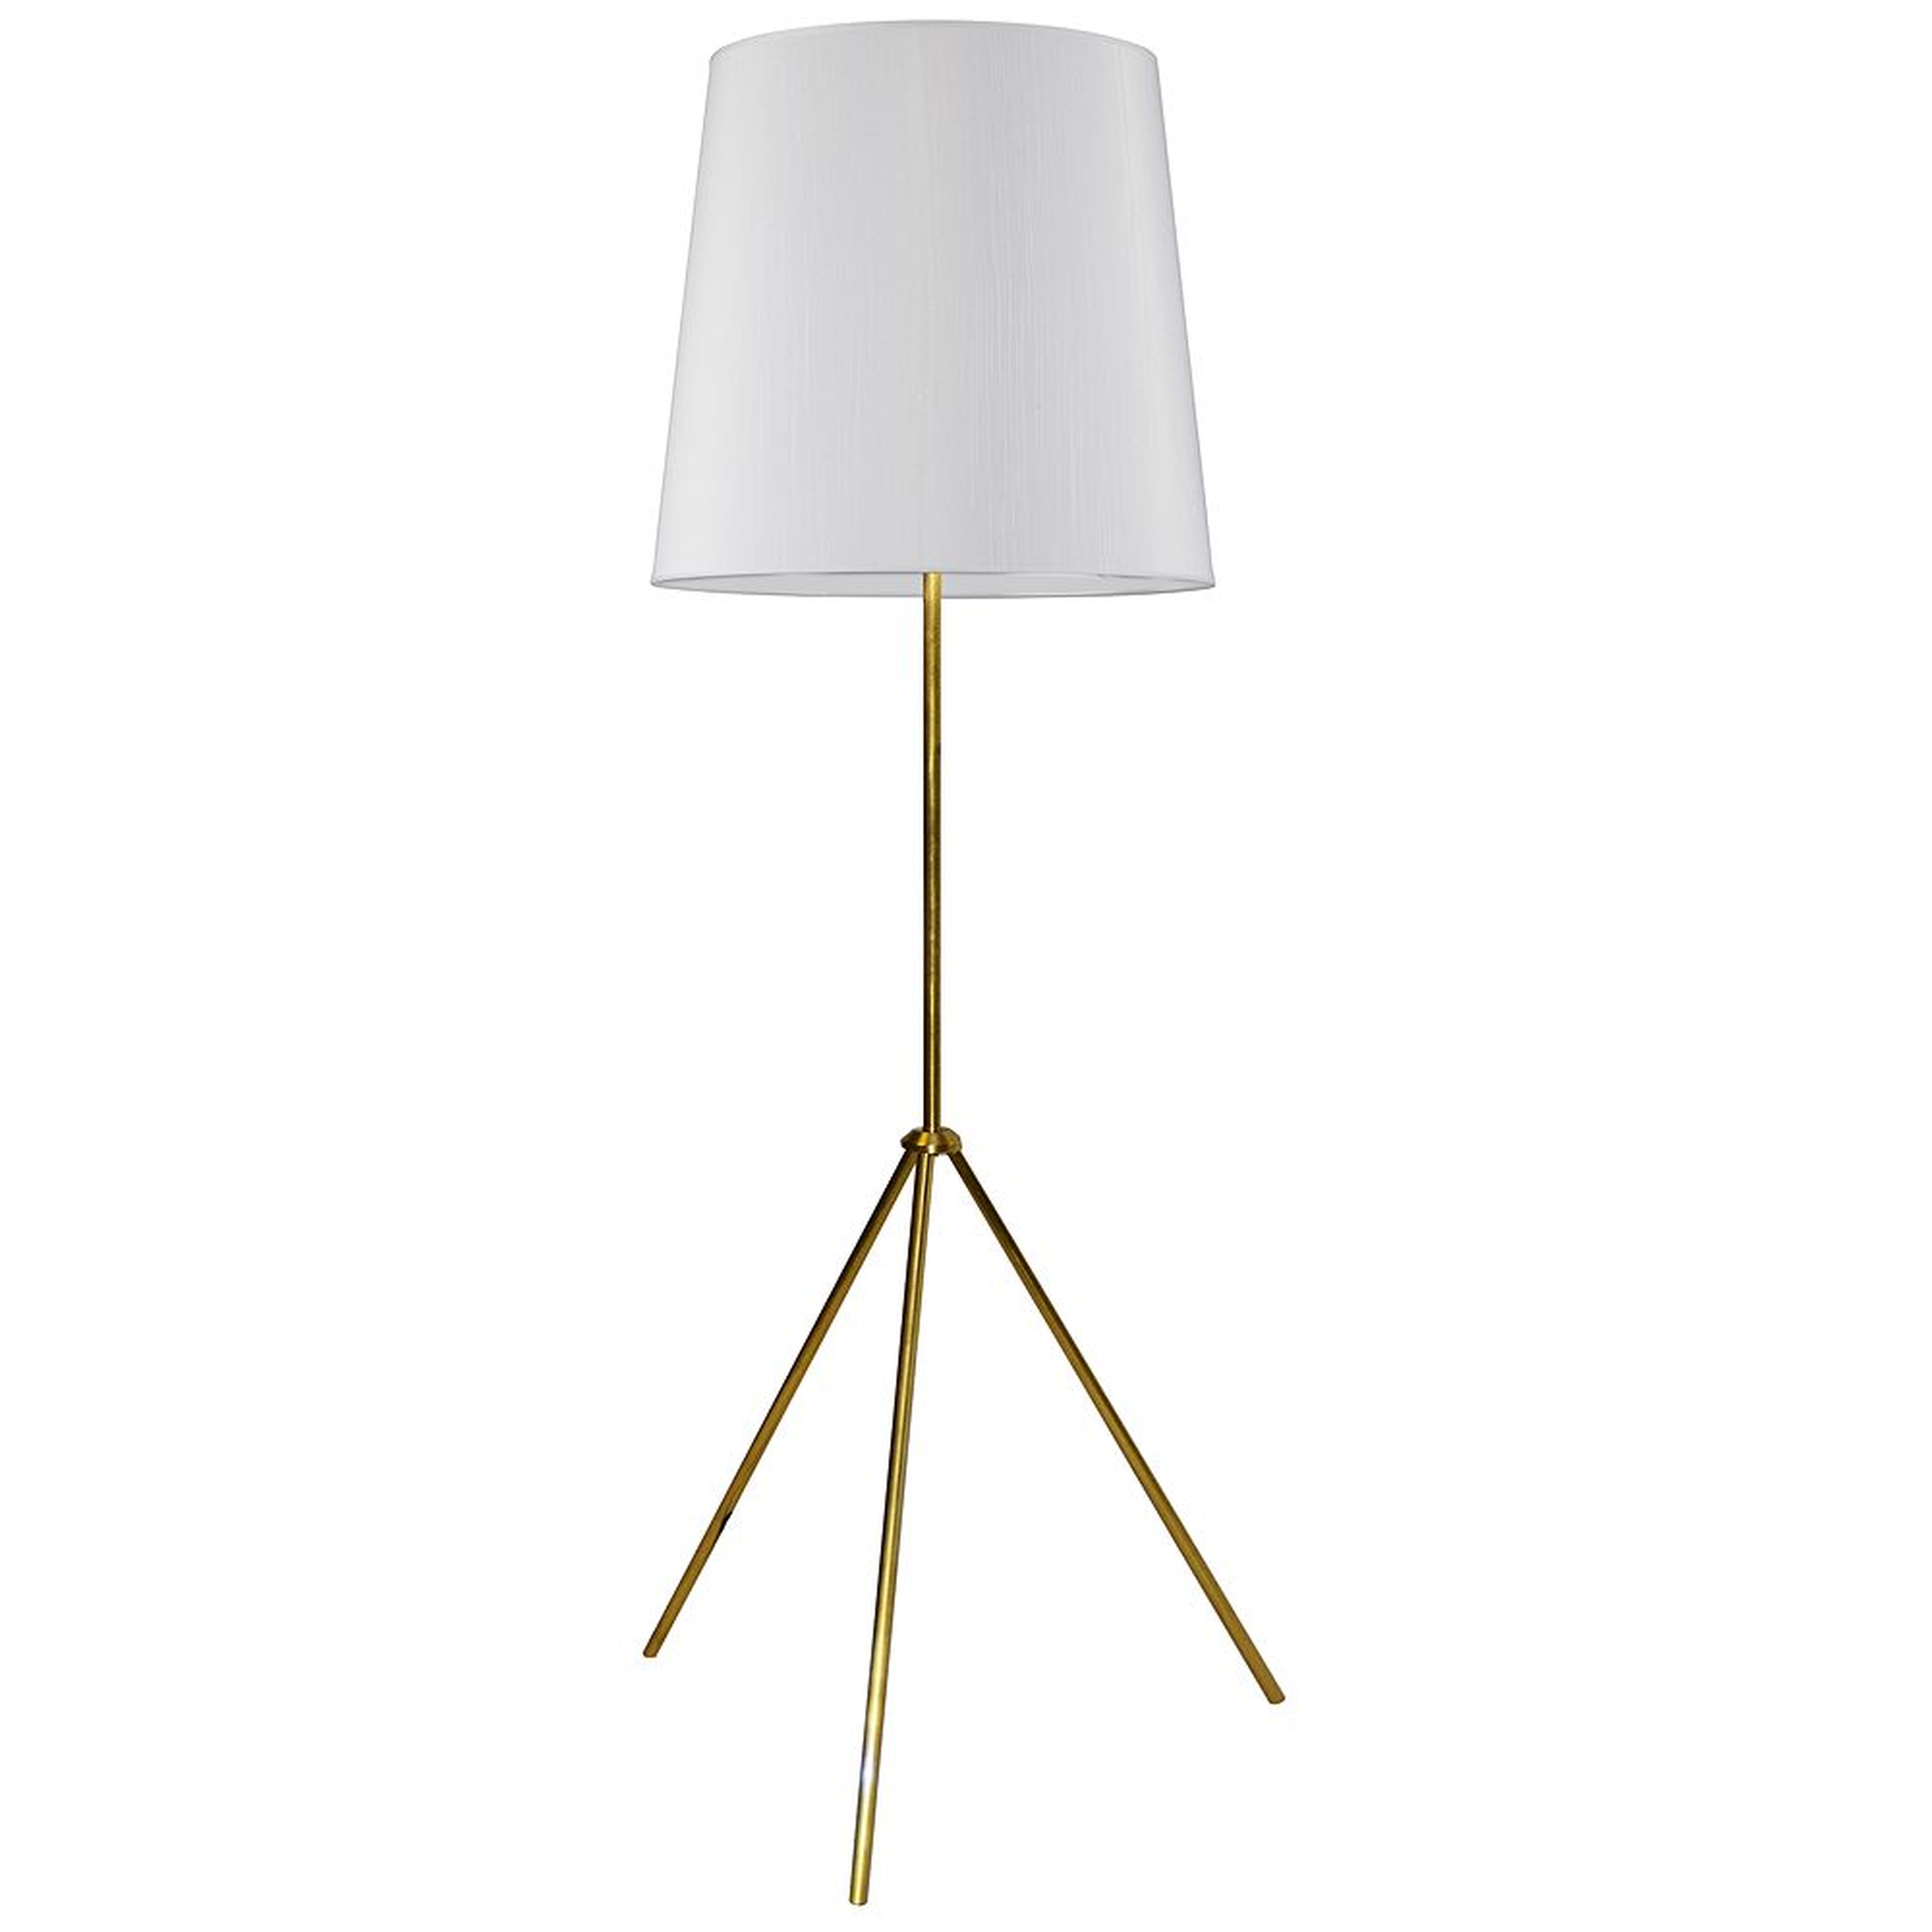 Finesse Aged Brass Tripod Floor Lamp w/ JTone White Shade - Style # 64G56 - Lamps Plus